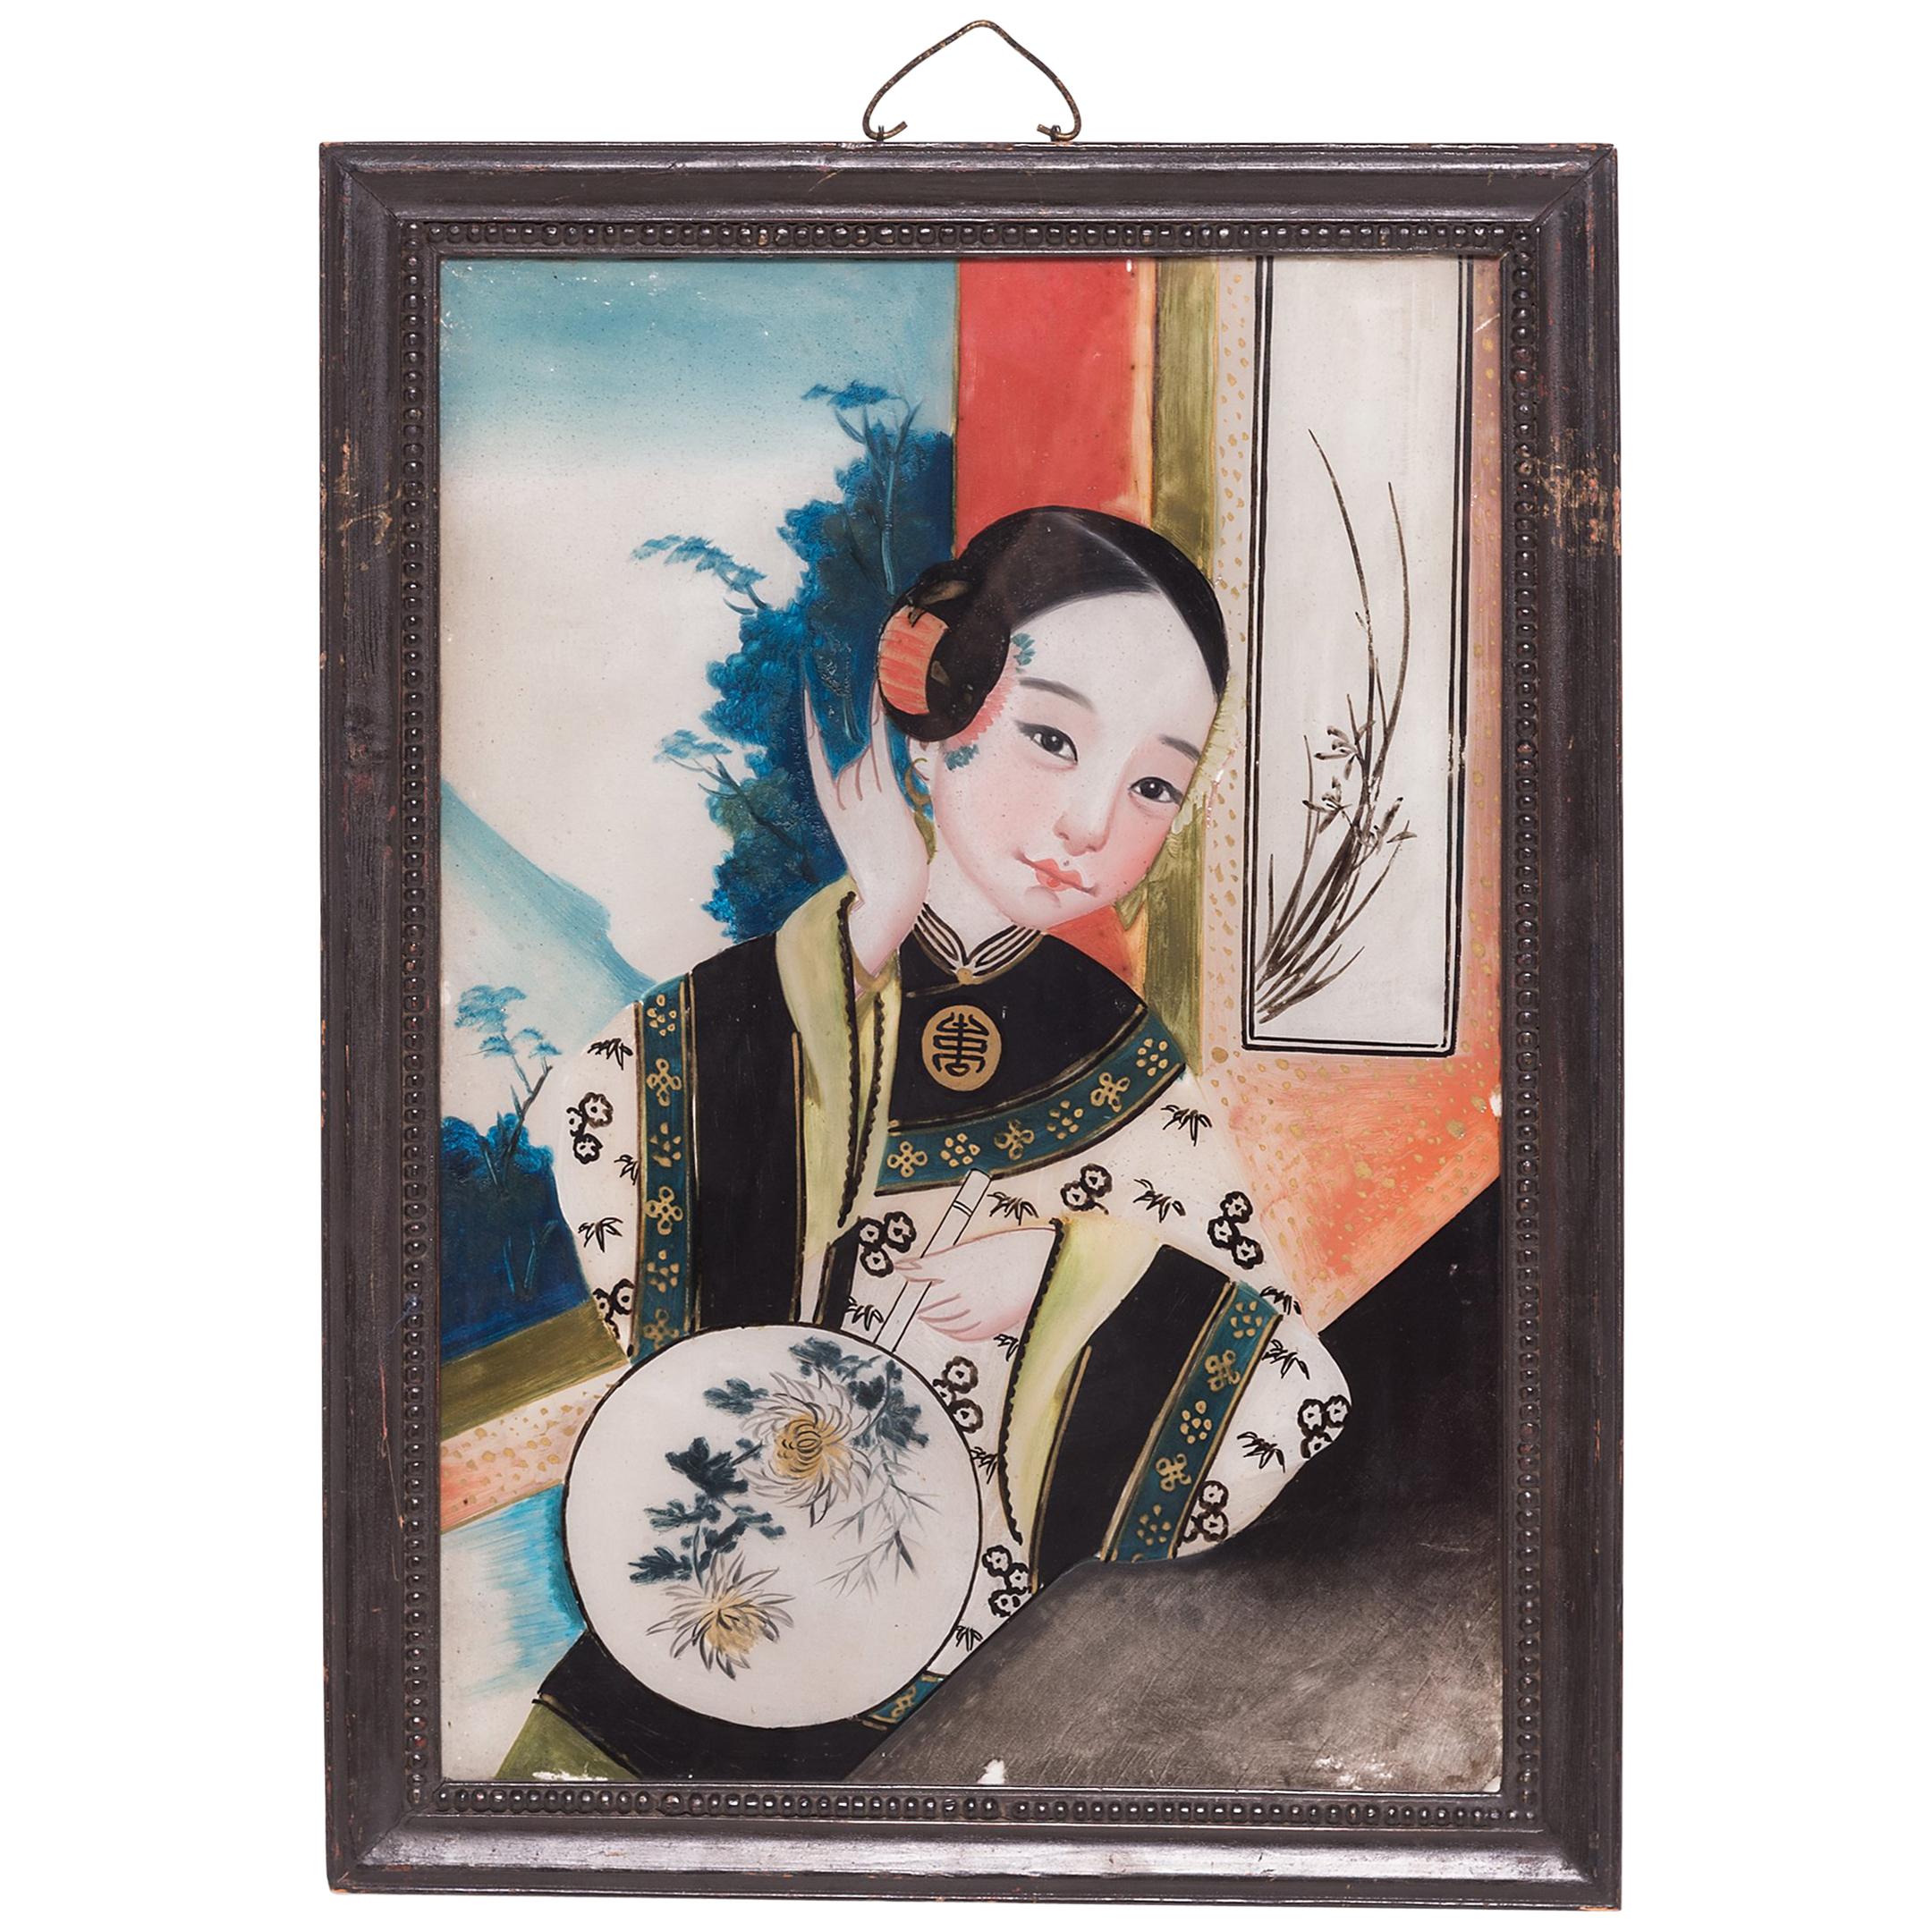 Chinese Reverse Glass Portrait with Painted Fan, c. 1900